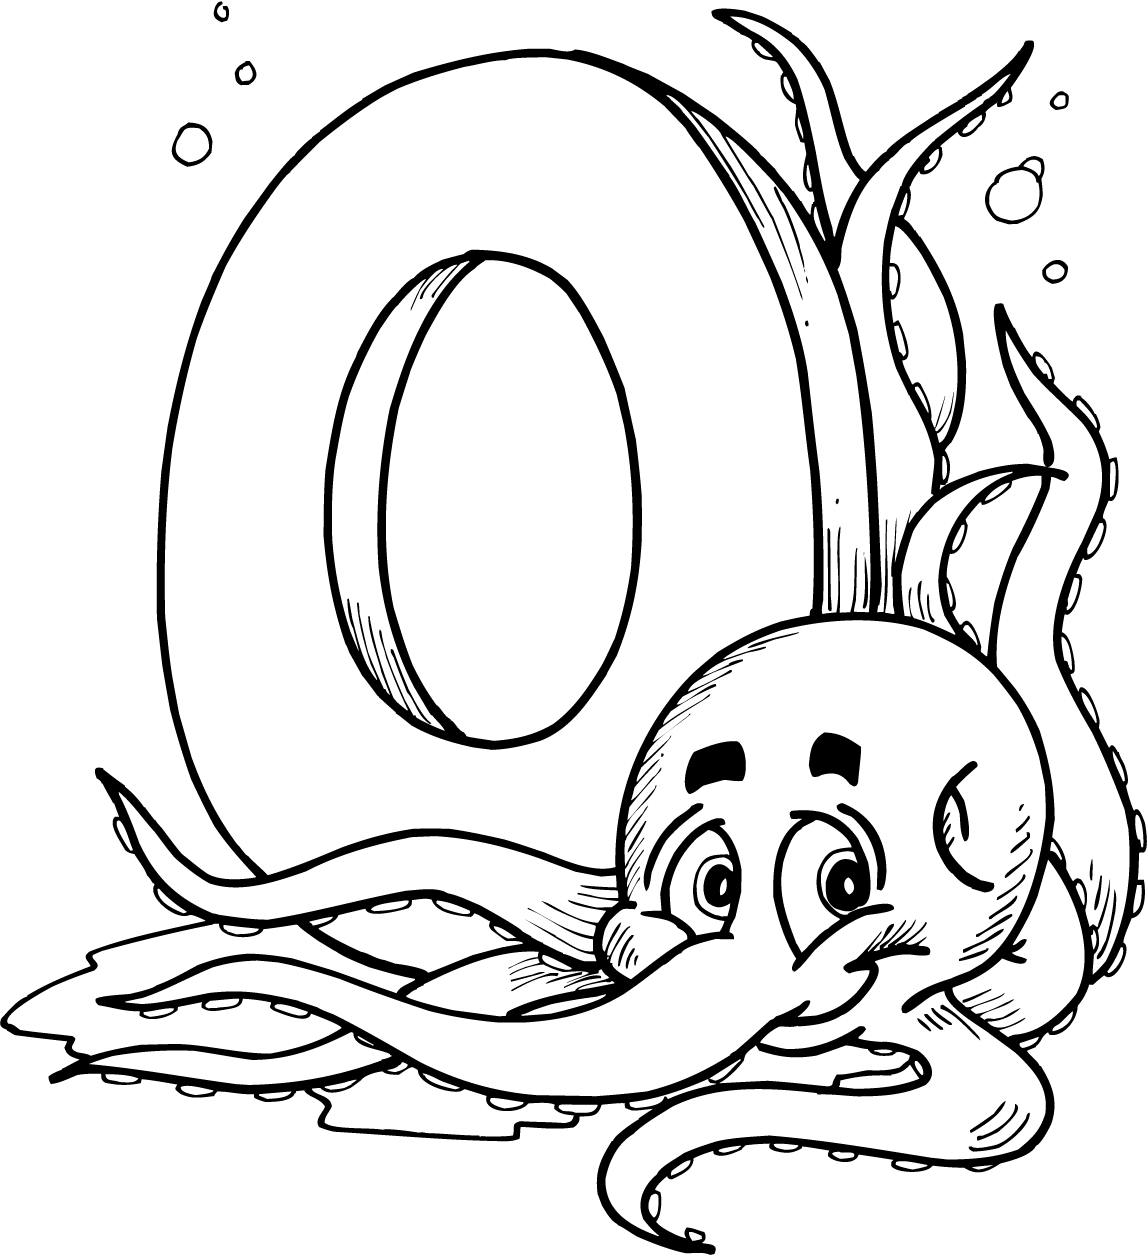 O is for octopus coloring pages letters